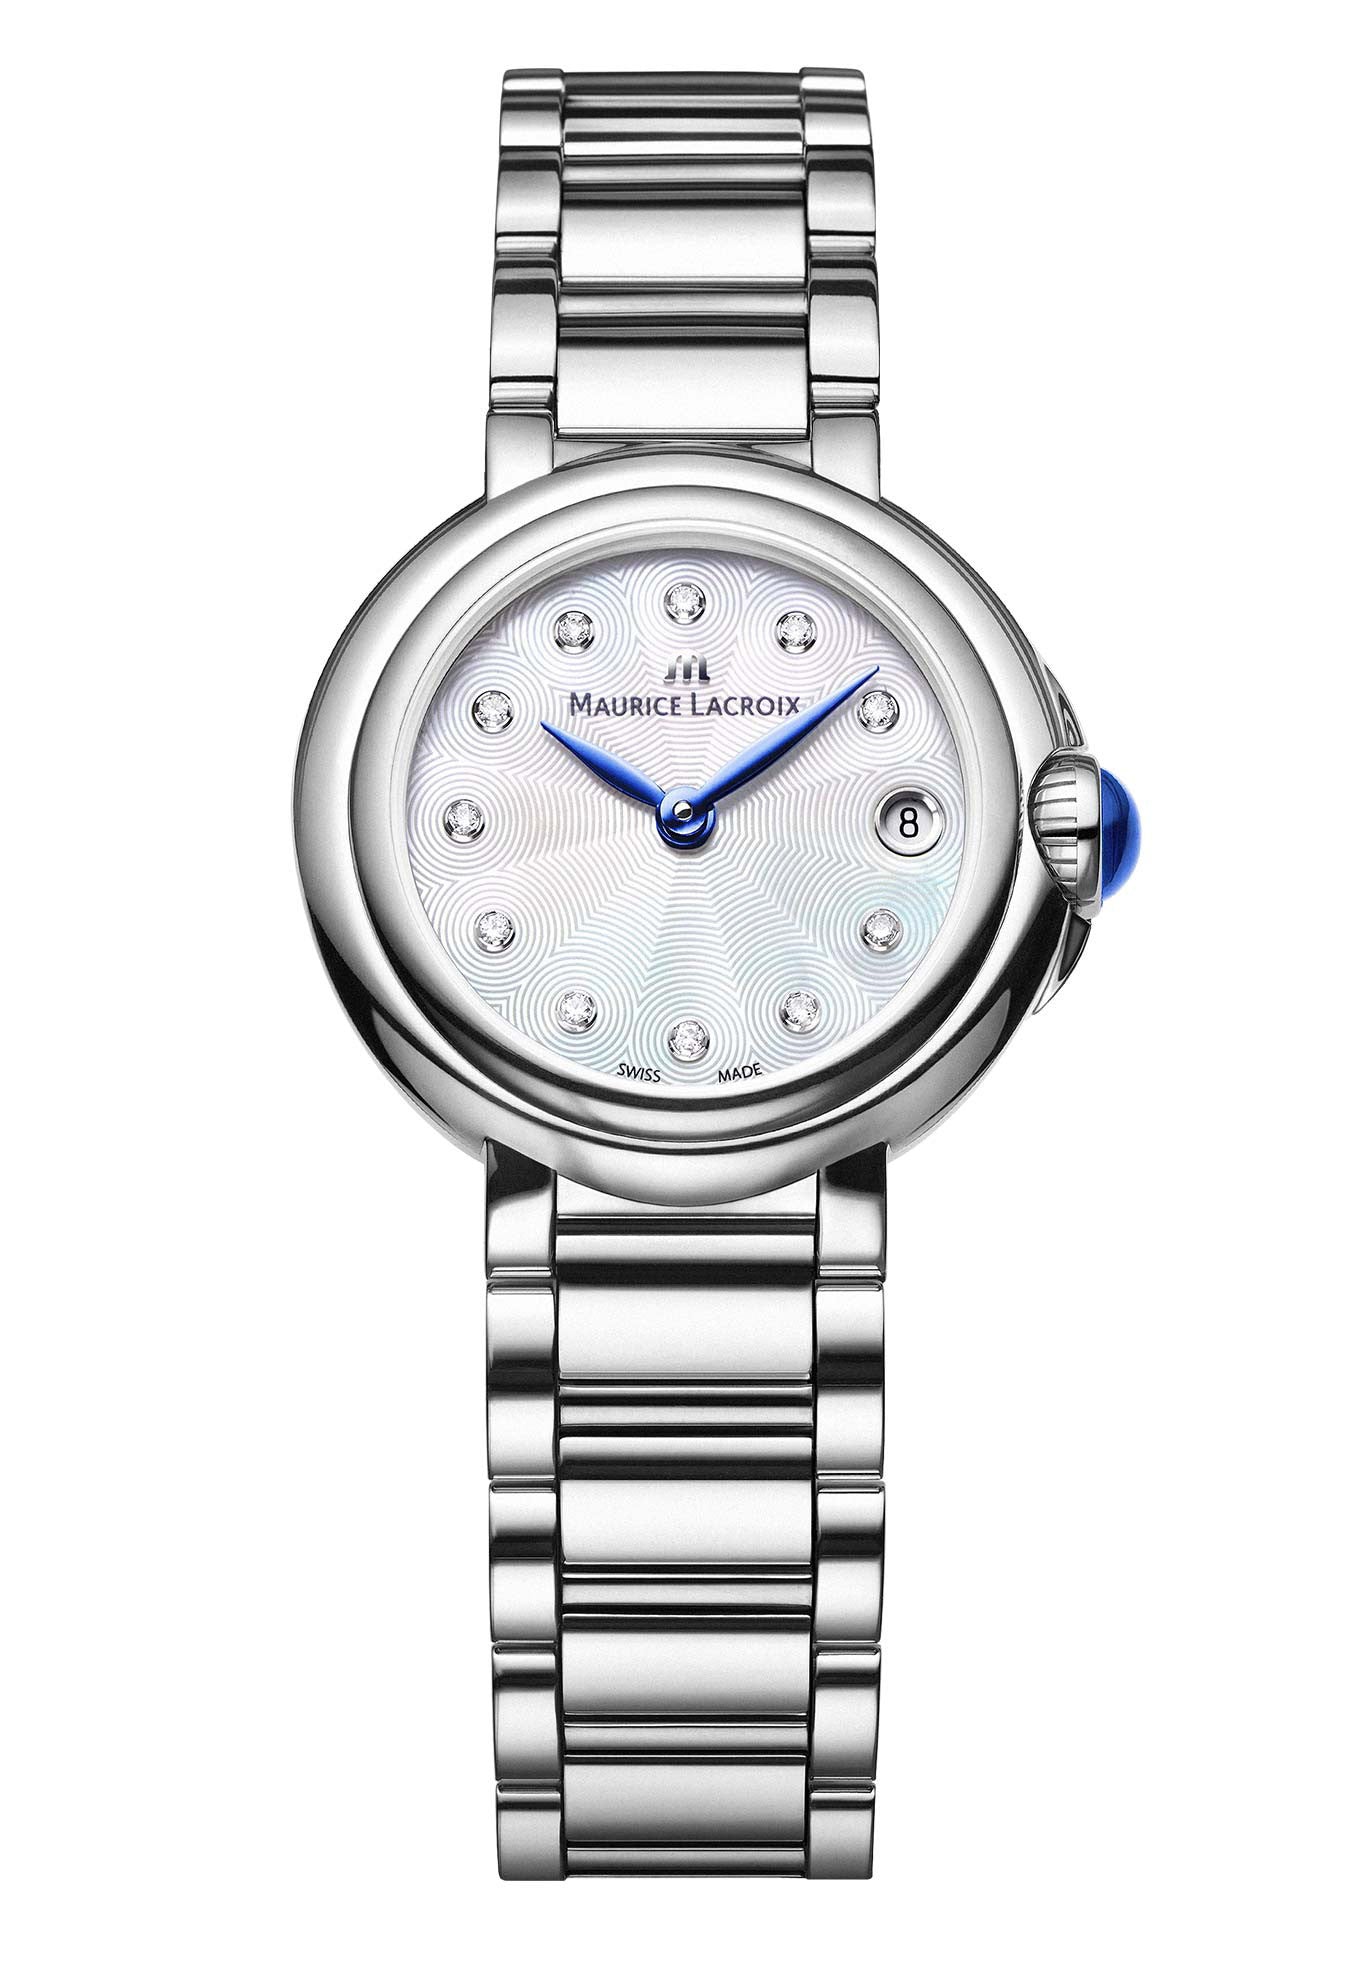 Maurice Lacroix Watch Fiaba Ladies D